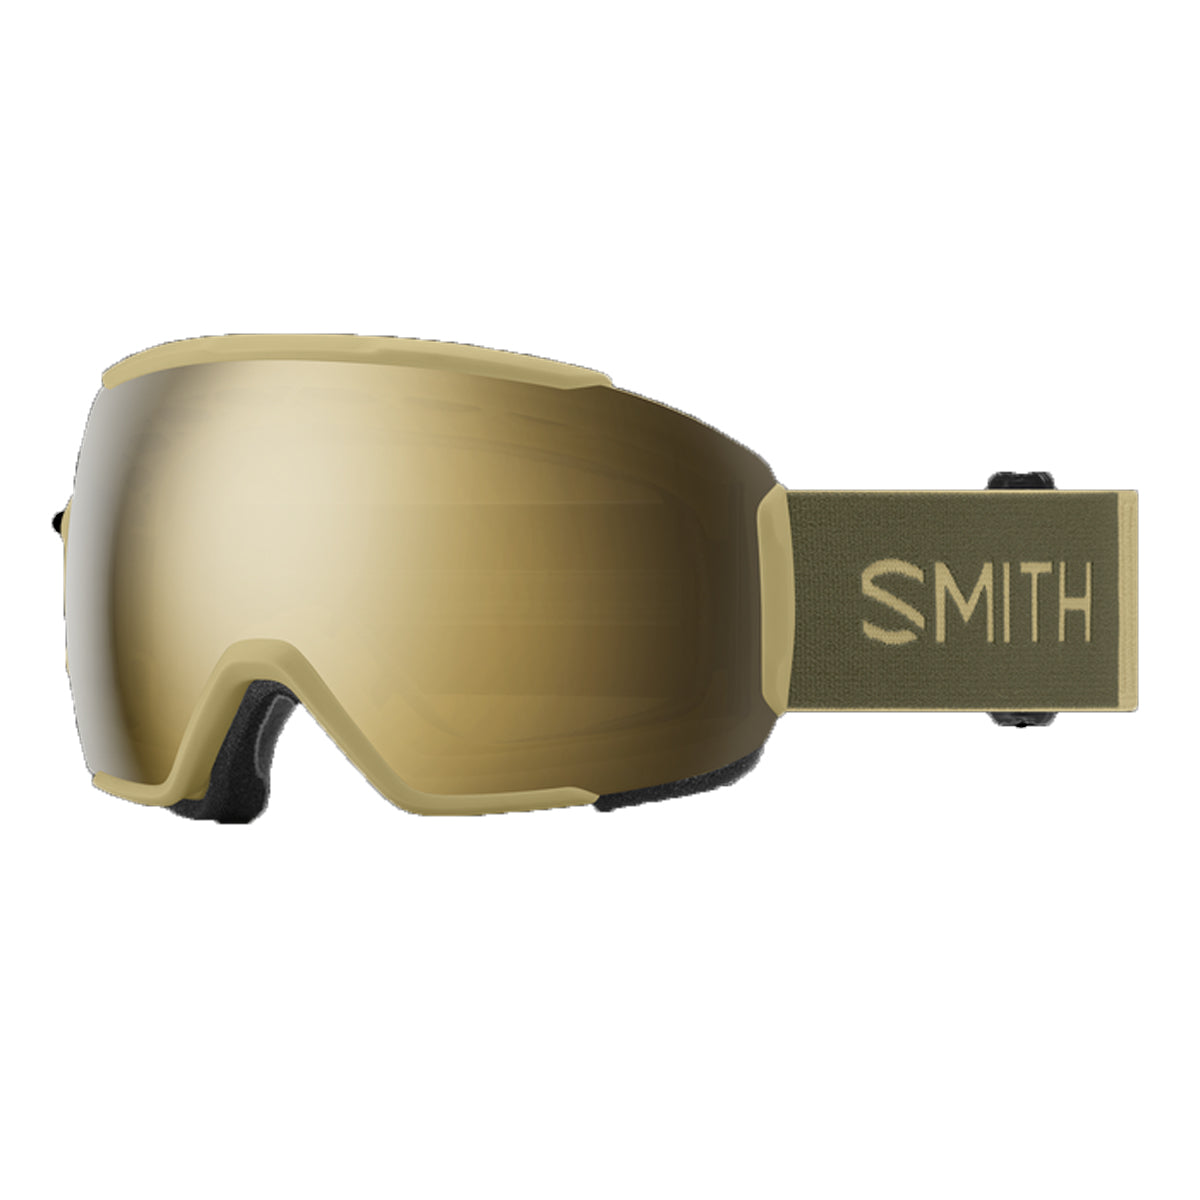 SMITH SEQUENCE OTG SNOWBOARD GOGGLES - LOW BRIDGE FIT